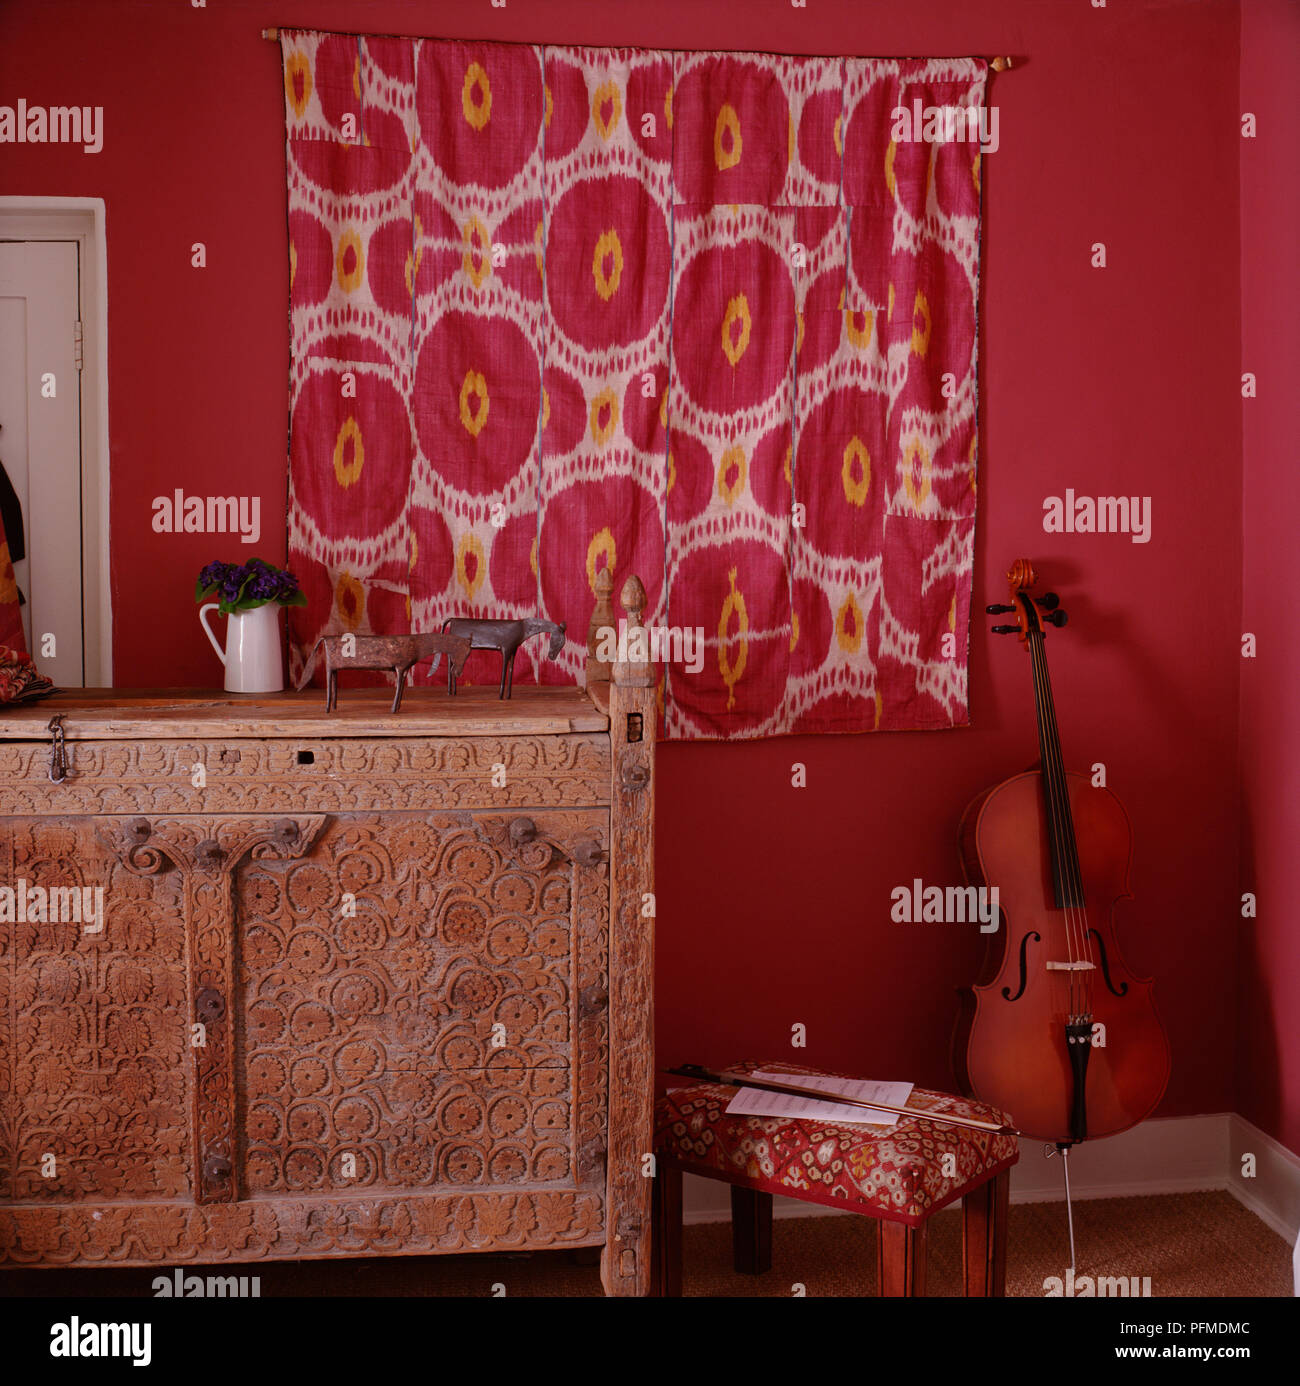 Red room, red and cream fabric hanging over curtain, horse ornaments and jug of flowers standing on ornate wooden dresser, violin leaning against wall, bow and sheet music on low stool. Stock Photo